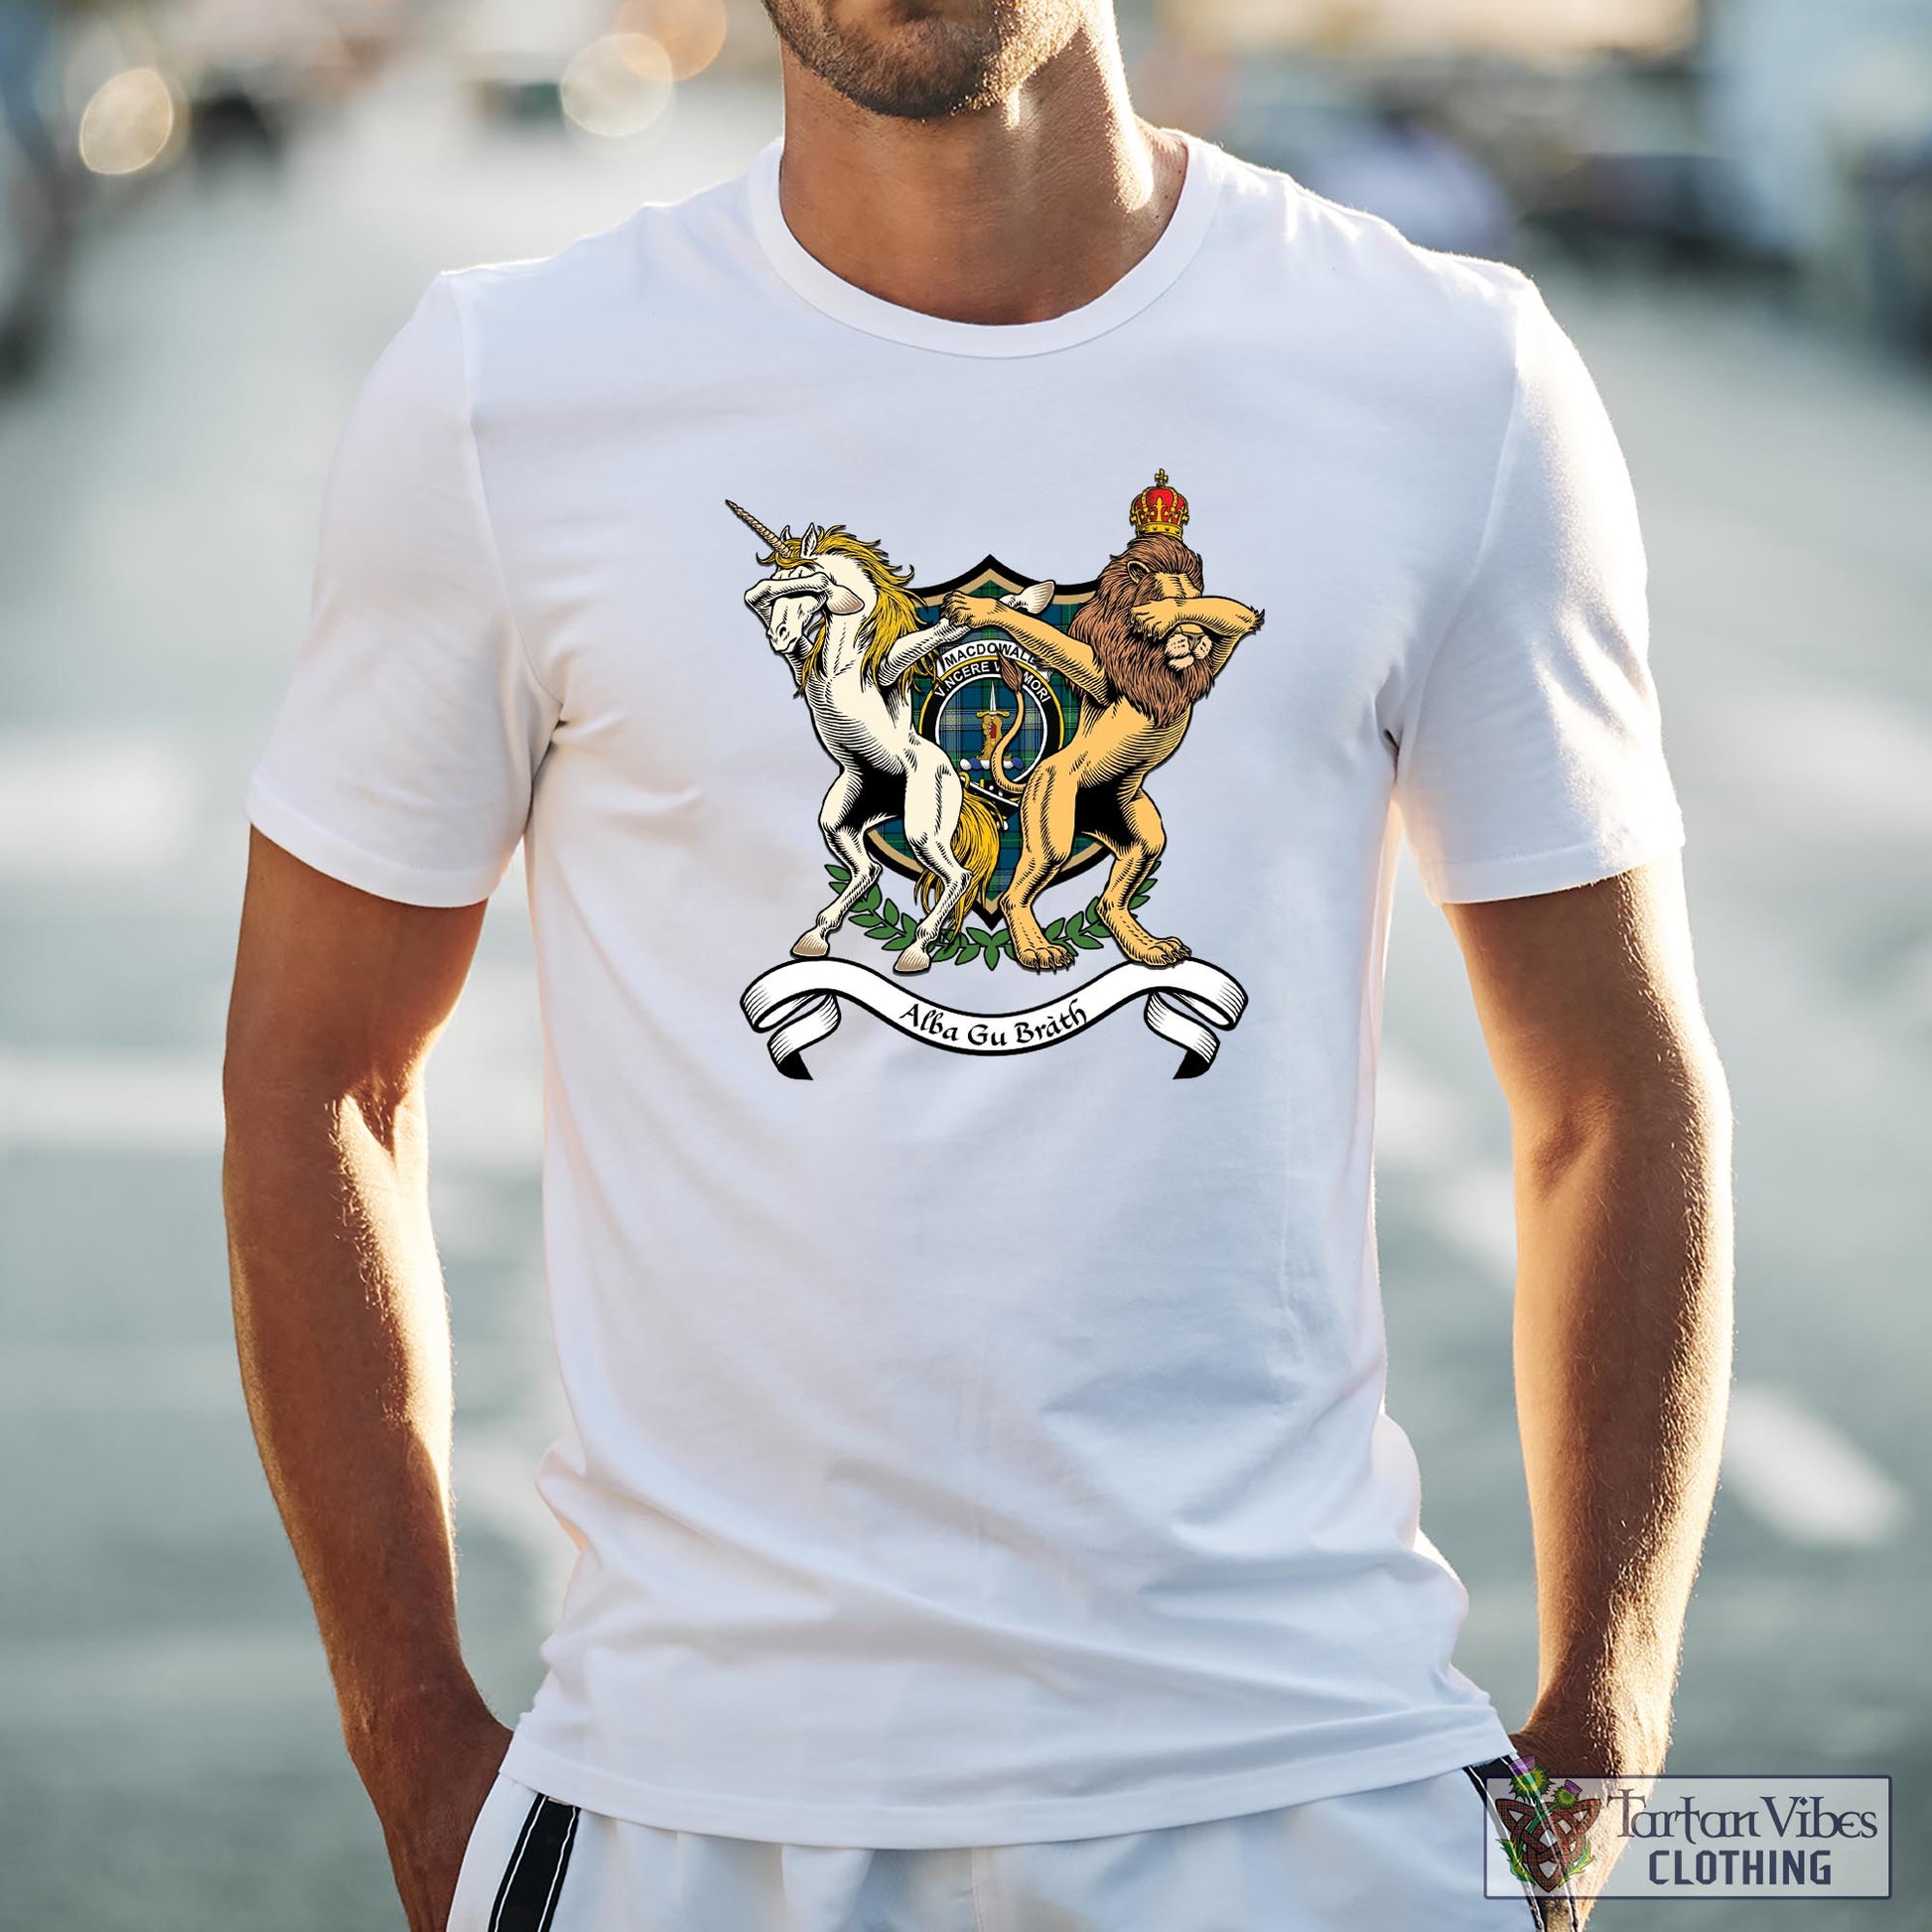 Tartan Vibes Clothing MacDowall Family Crest Cotton Men's T-Shirt with Scotland Royal Coat Of Arm Funny Style